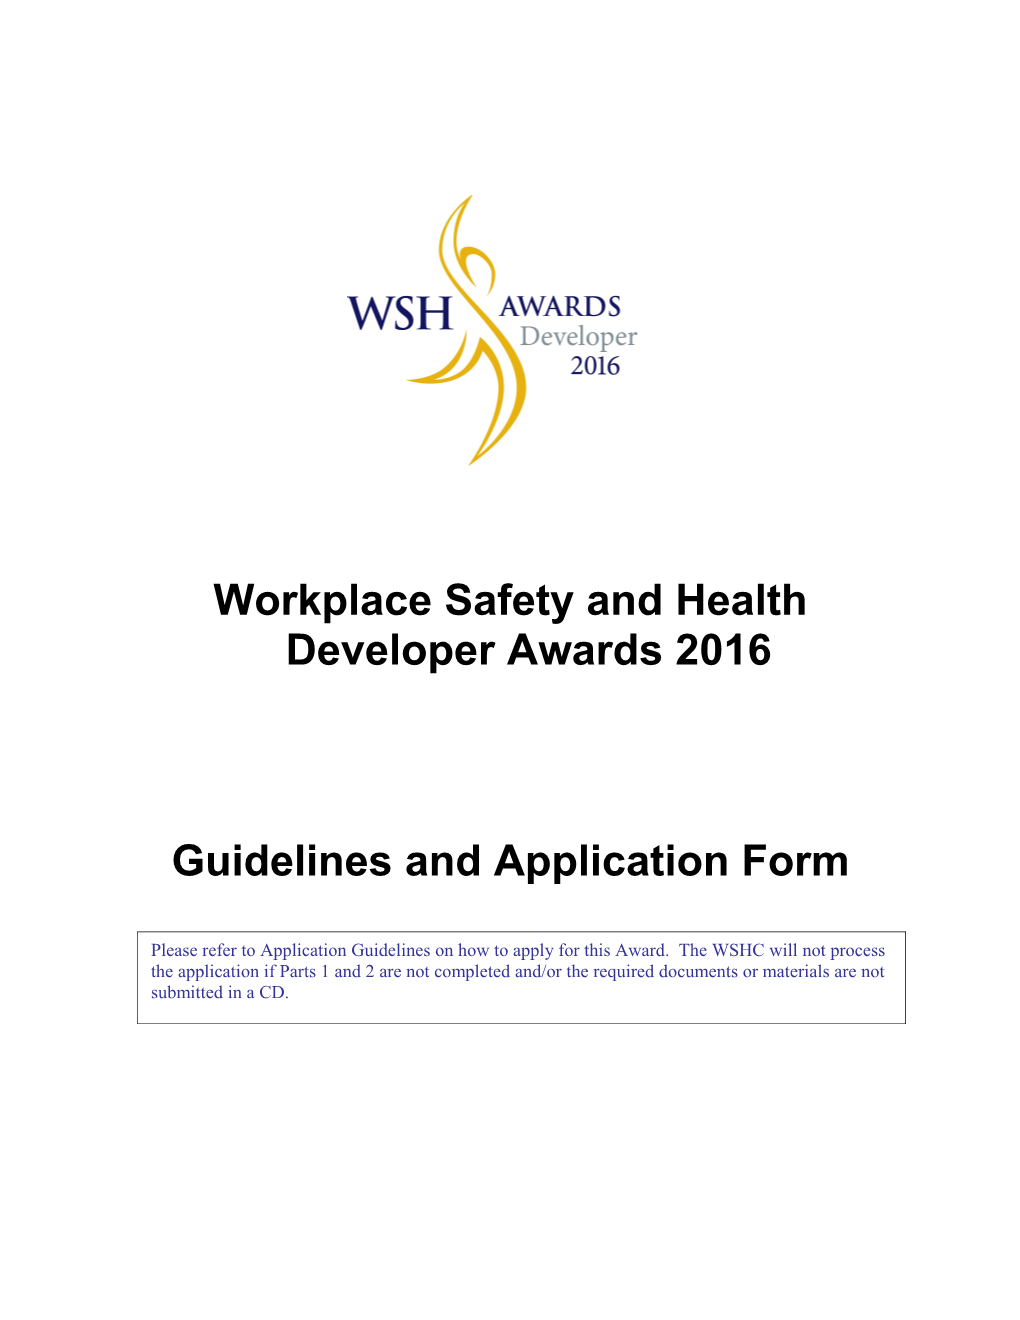 Workplace Safety and Health Developer Awards 2016